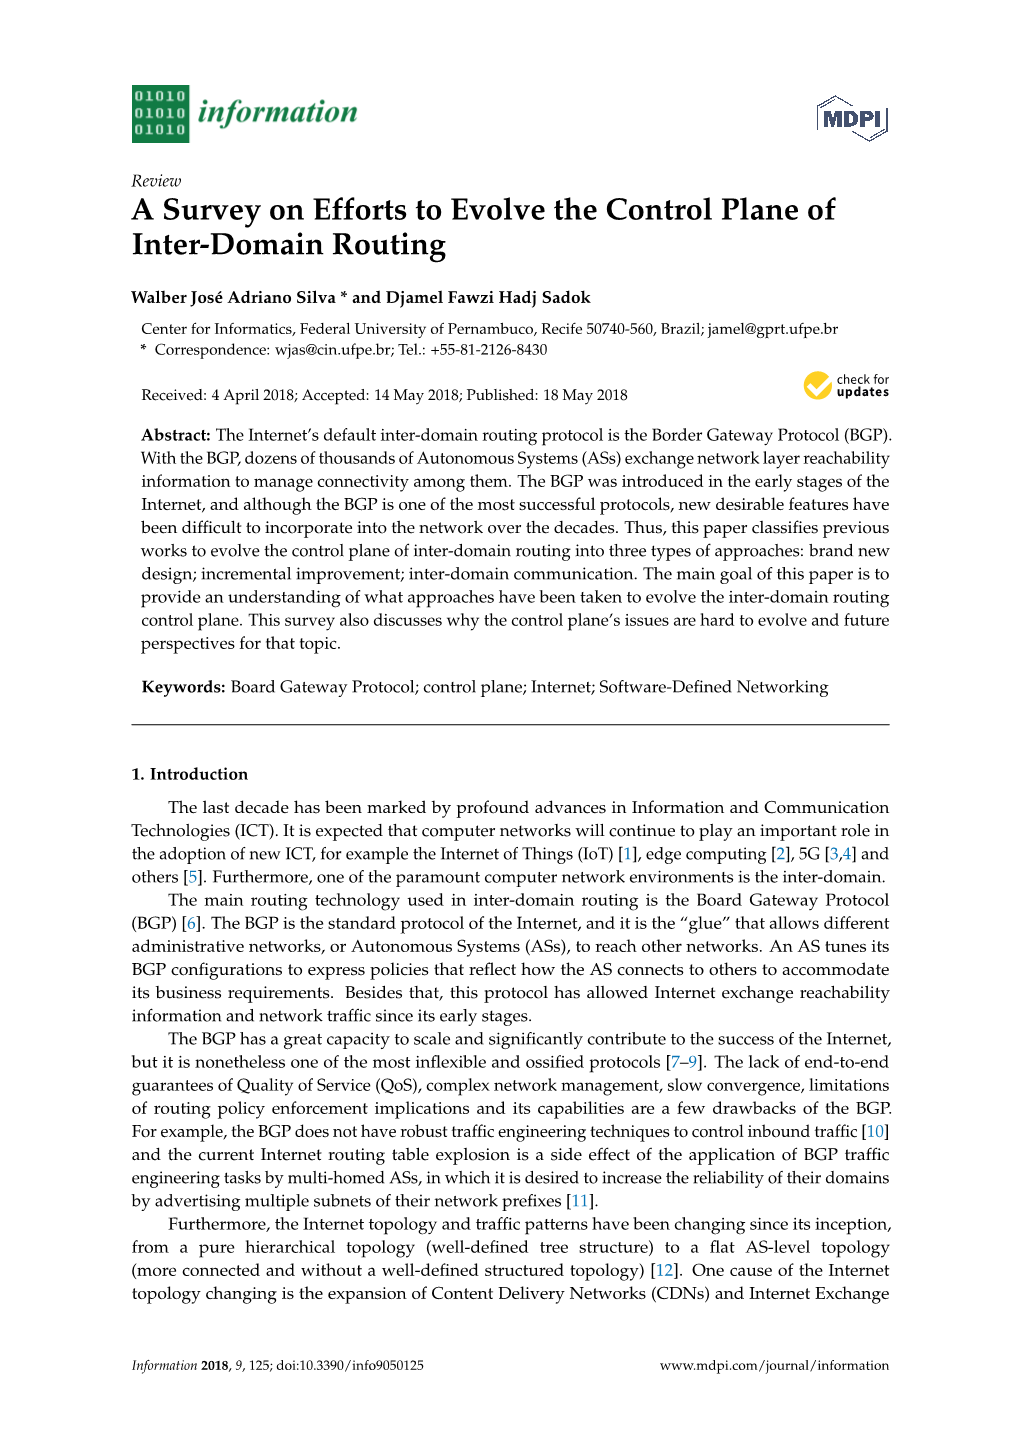 A Survey on Efforts to Evolve the Control Plane of Inter-Domain Routing